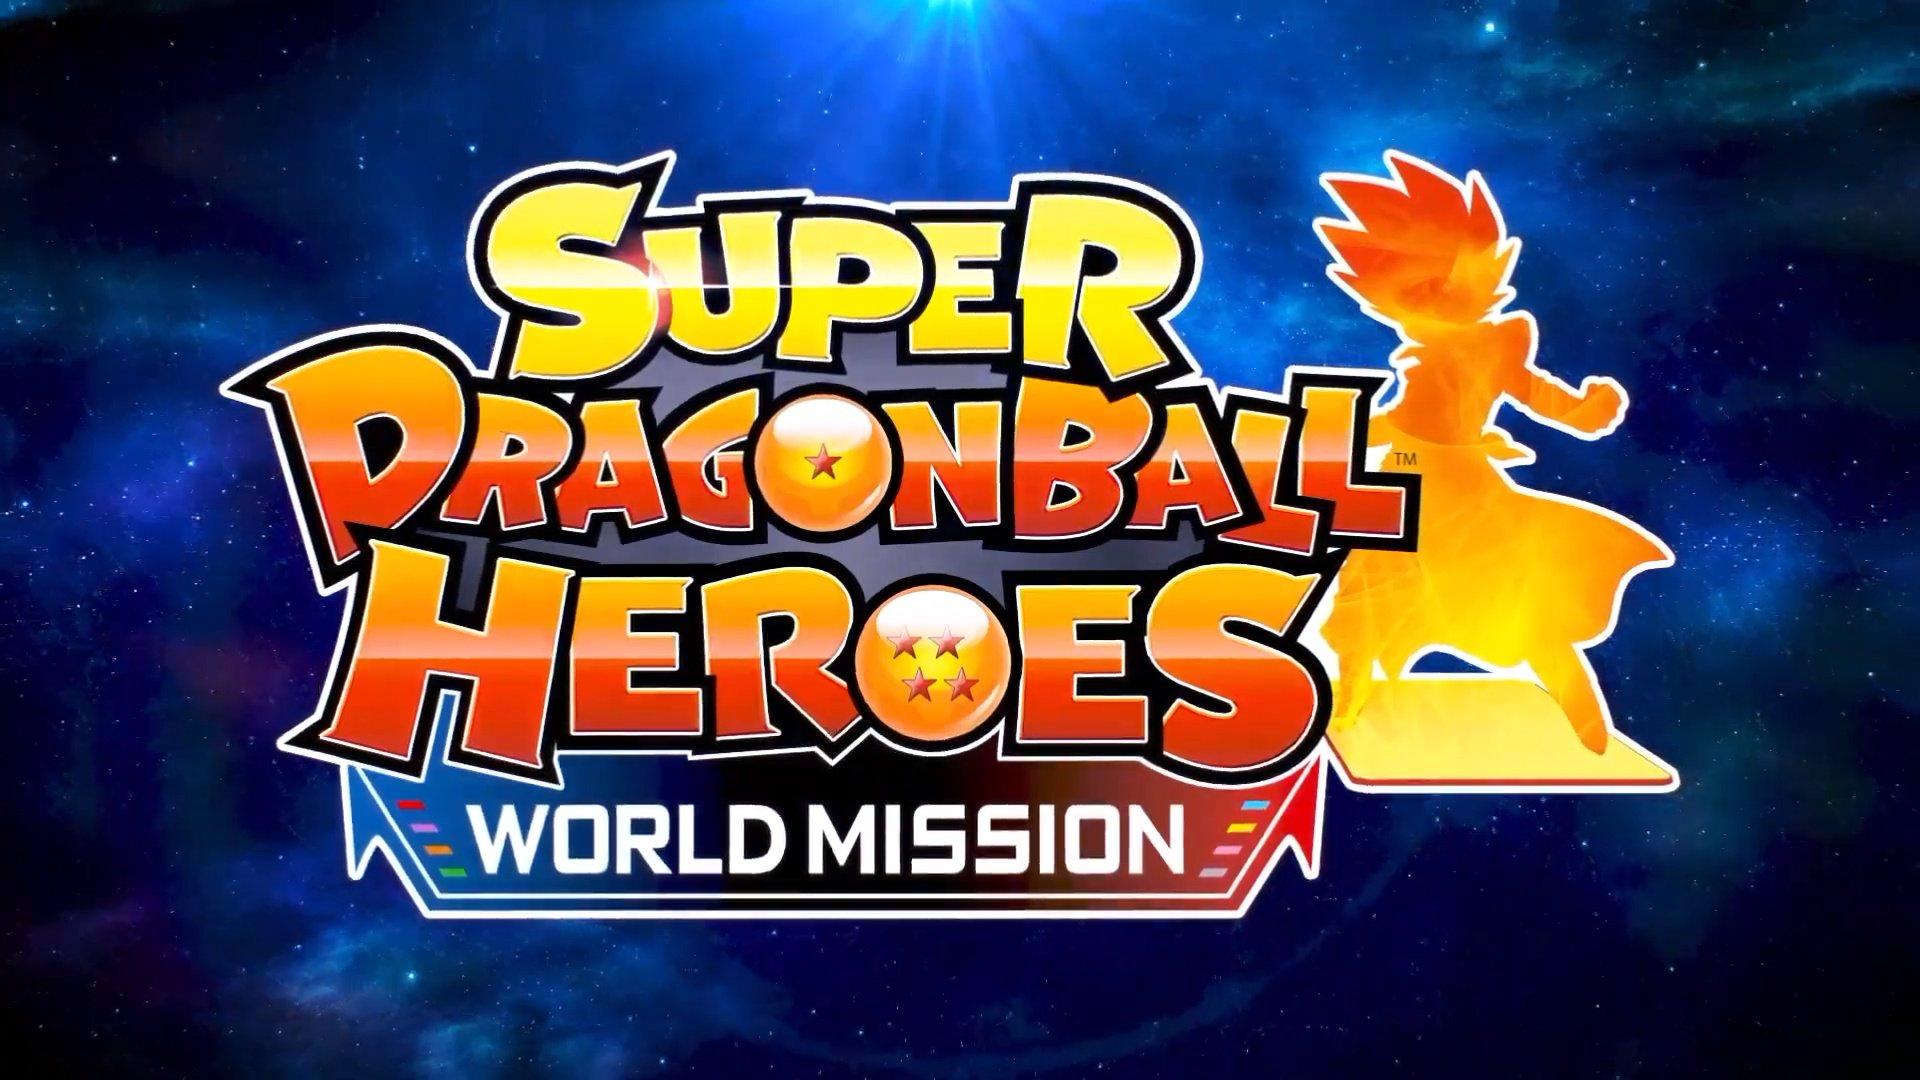 Super Dragon Ball Heroes: World Mission Unleashes Card Battles